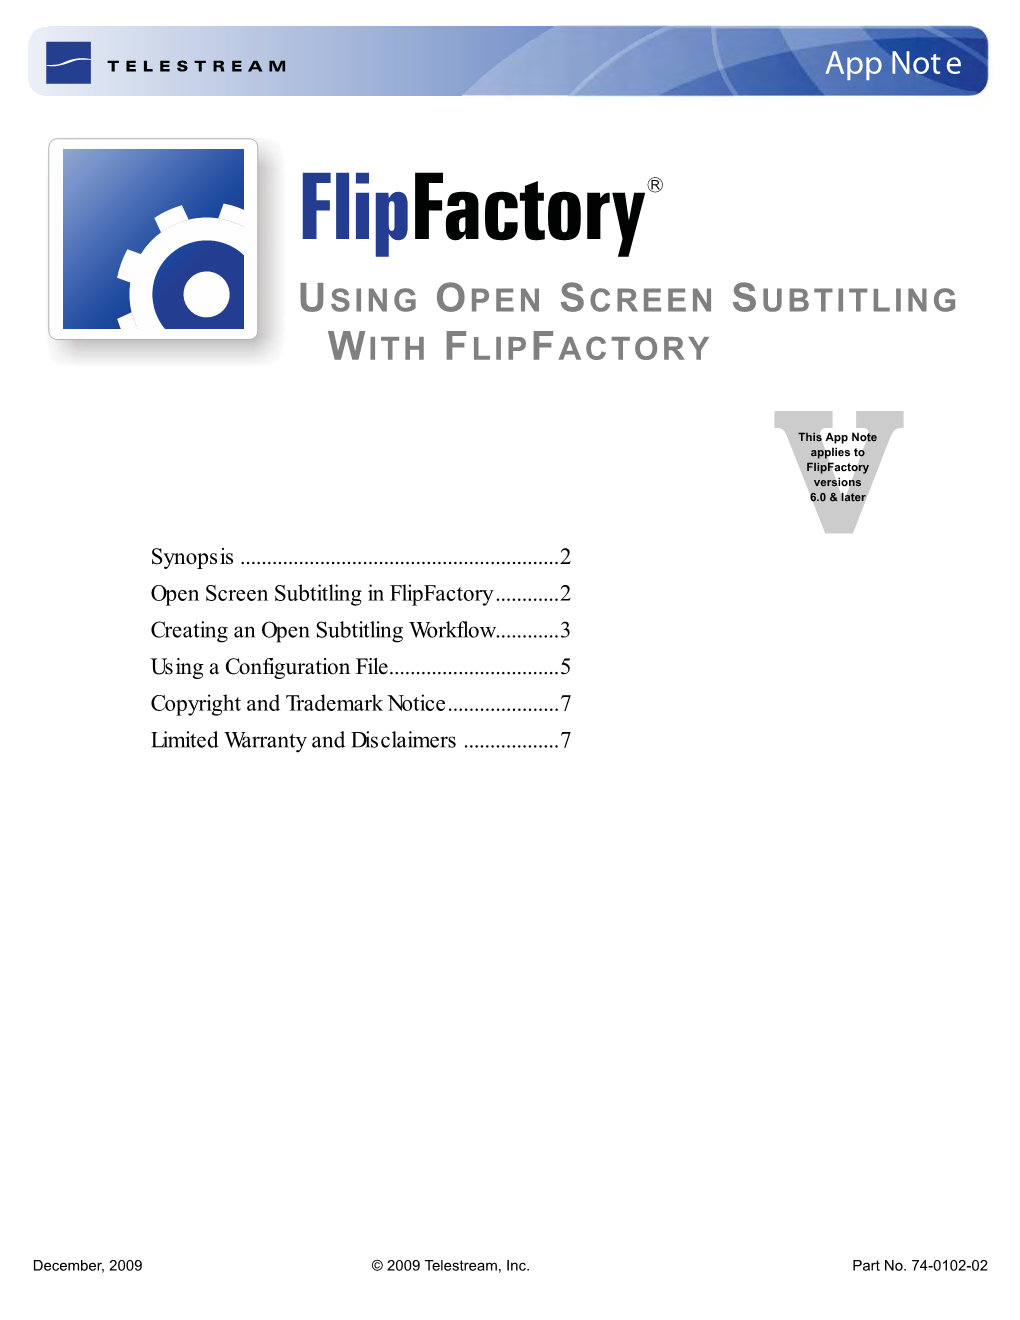 Using Open Screen Subtitling with Flipfactory App Note